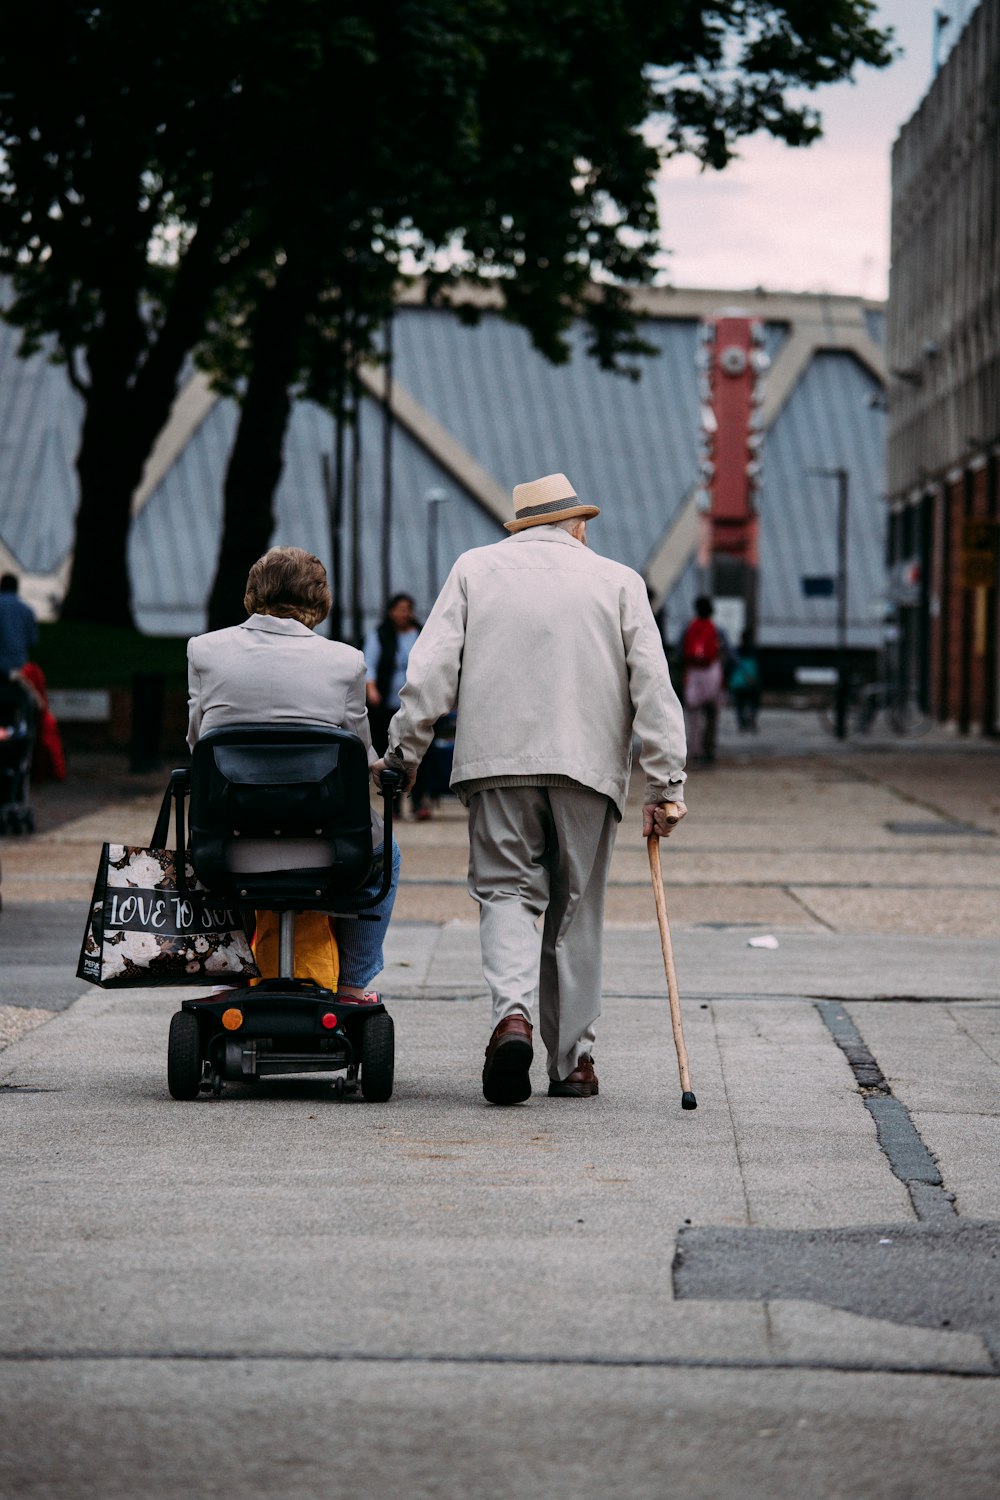 a person walking with a stroller